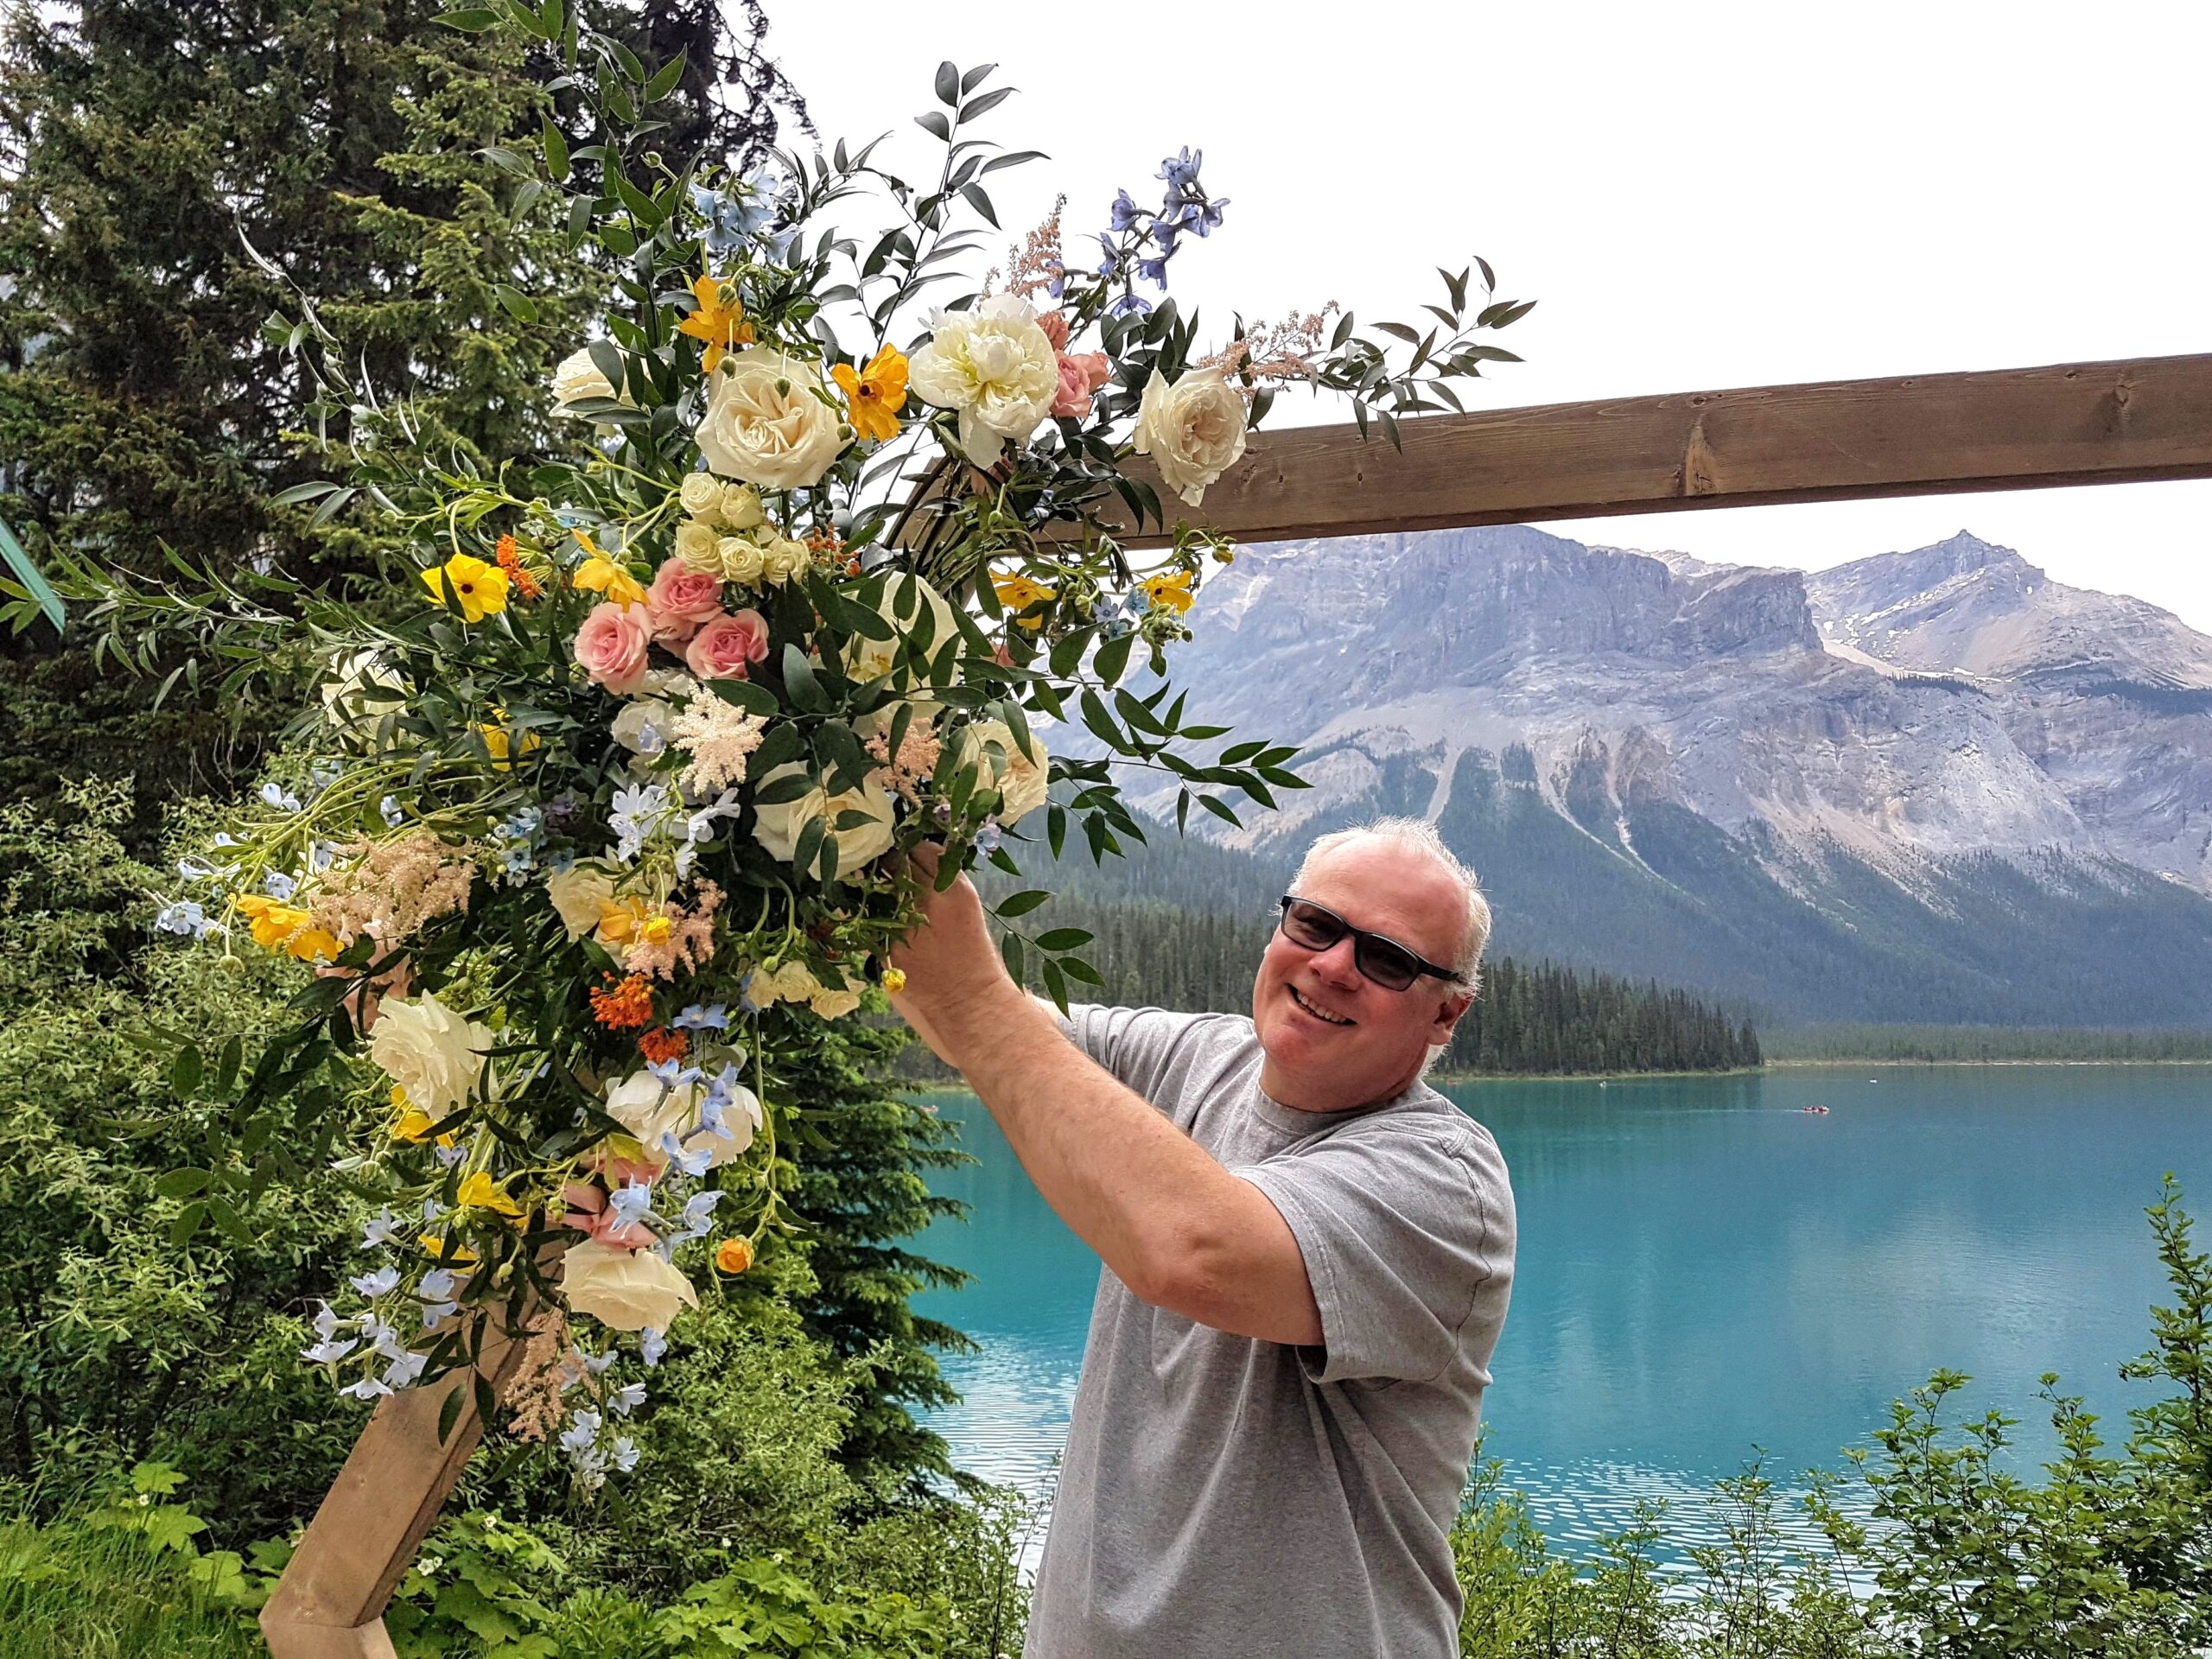 Ralph Dekker, Dutch Florist from Canmore is finishing a colorful arrangement for an arch at Emerald Lake, with an stunning view of the lake